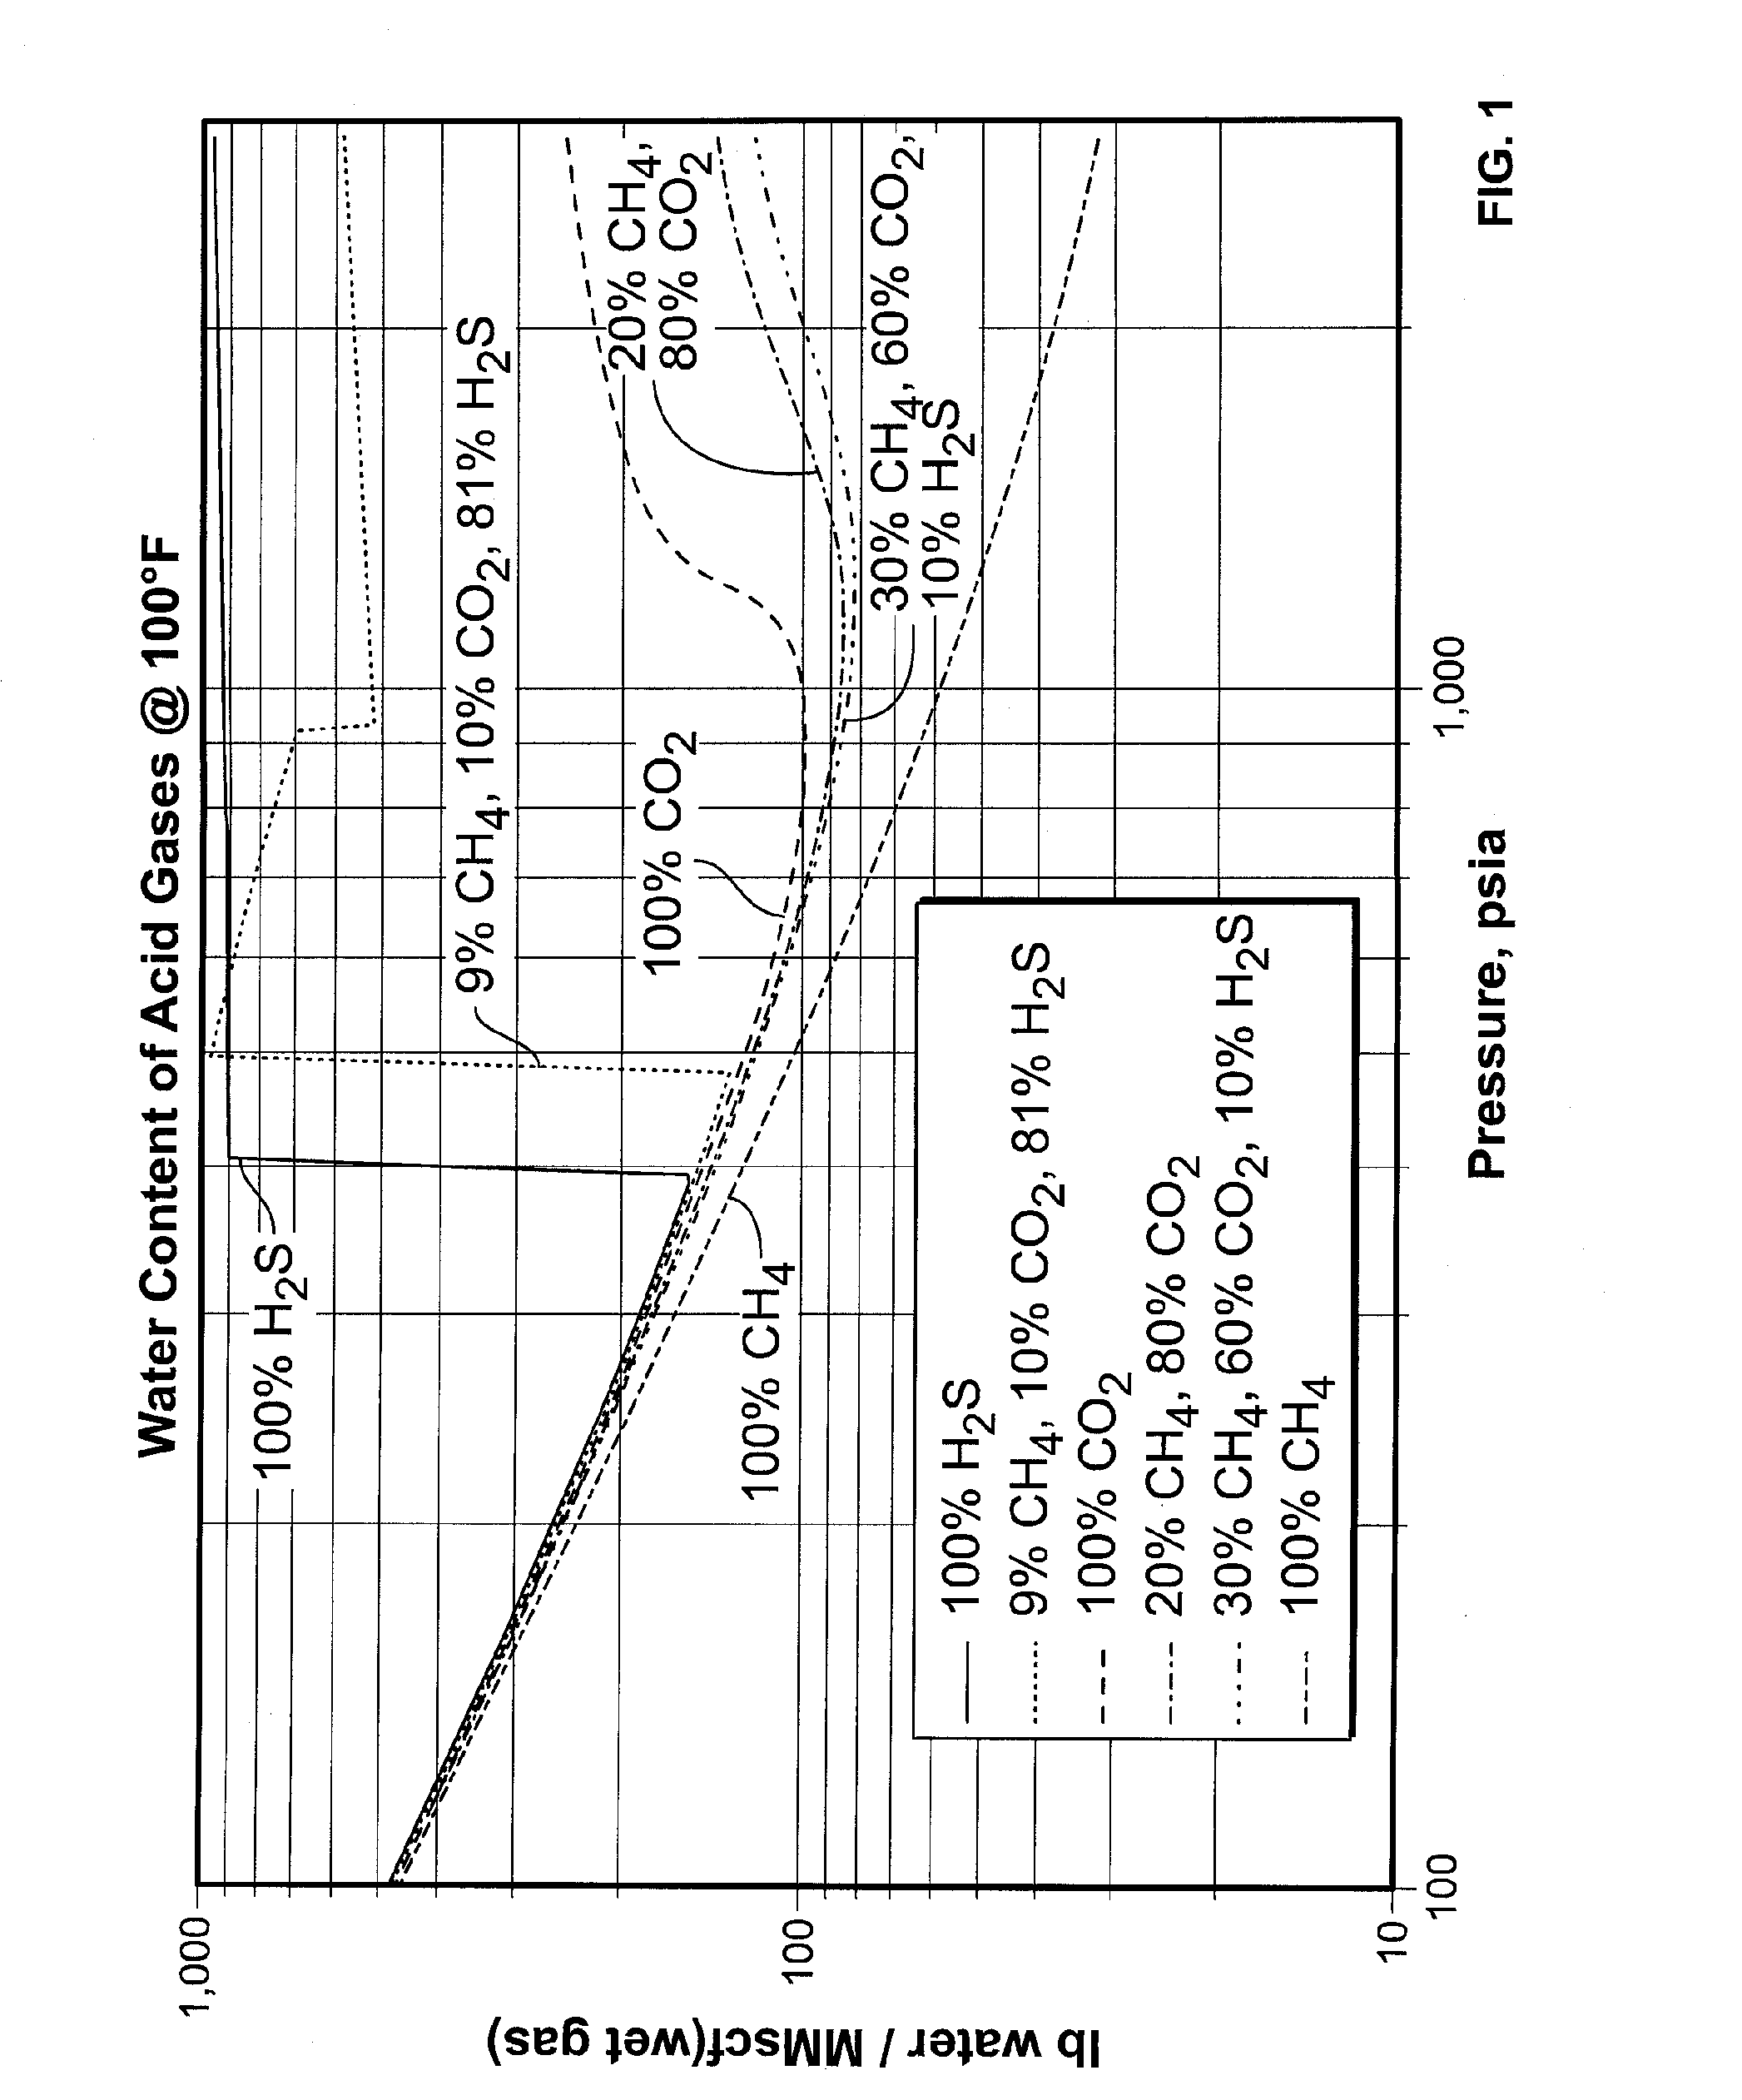 Process for removing condensable components from a fluid